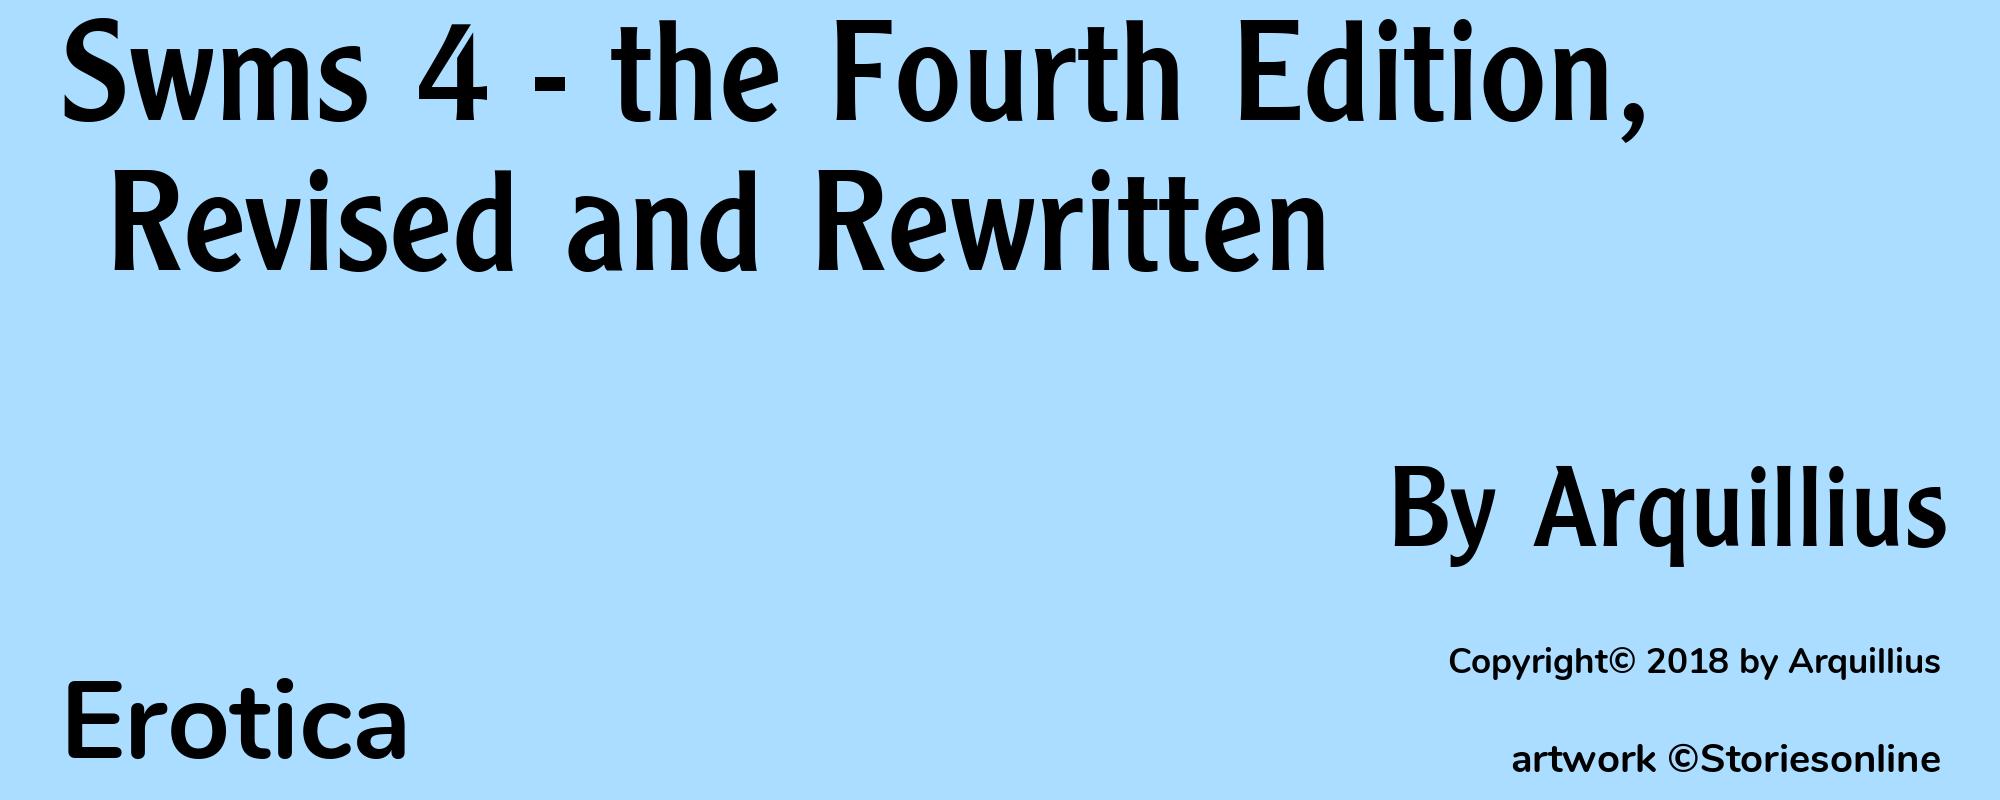 Swms 4 - the Fourth Edition, Revised and Rewritten - Cover